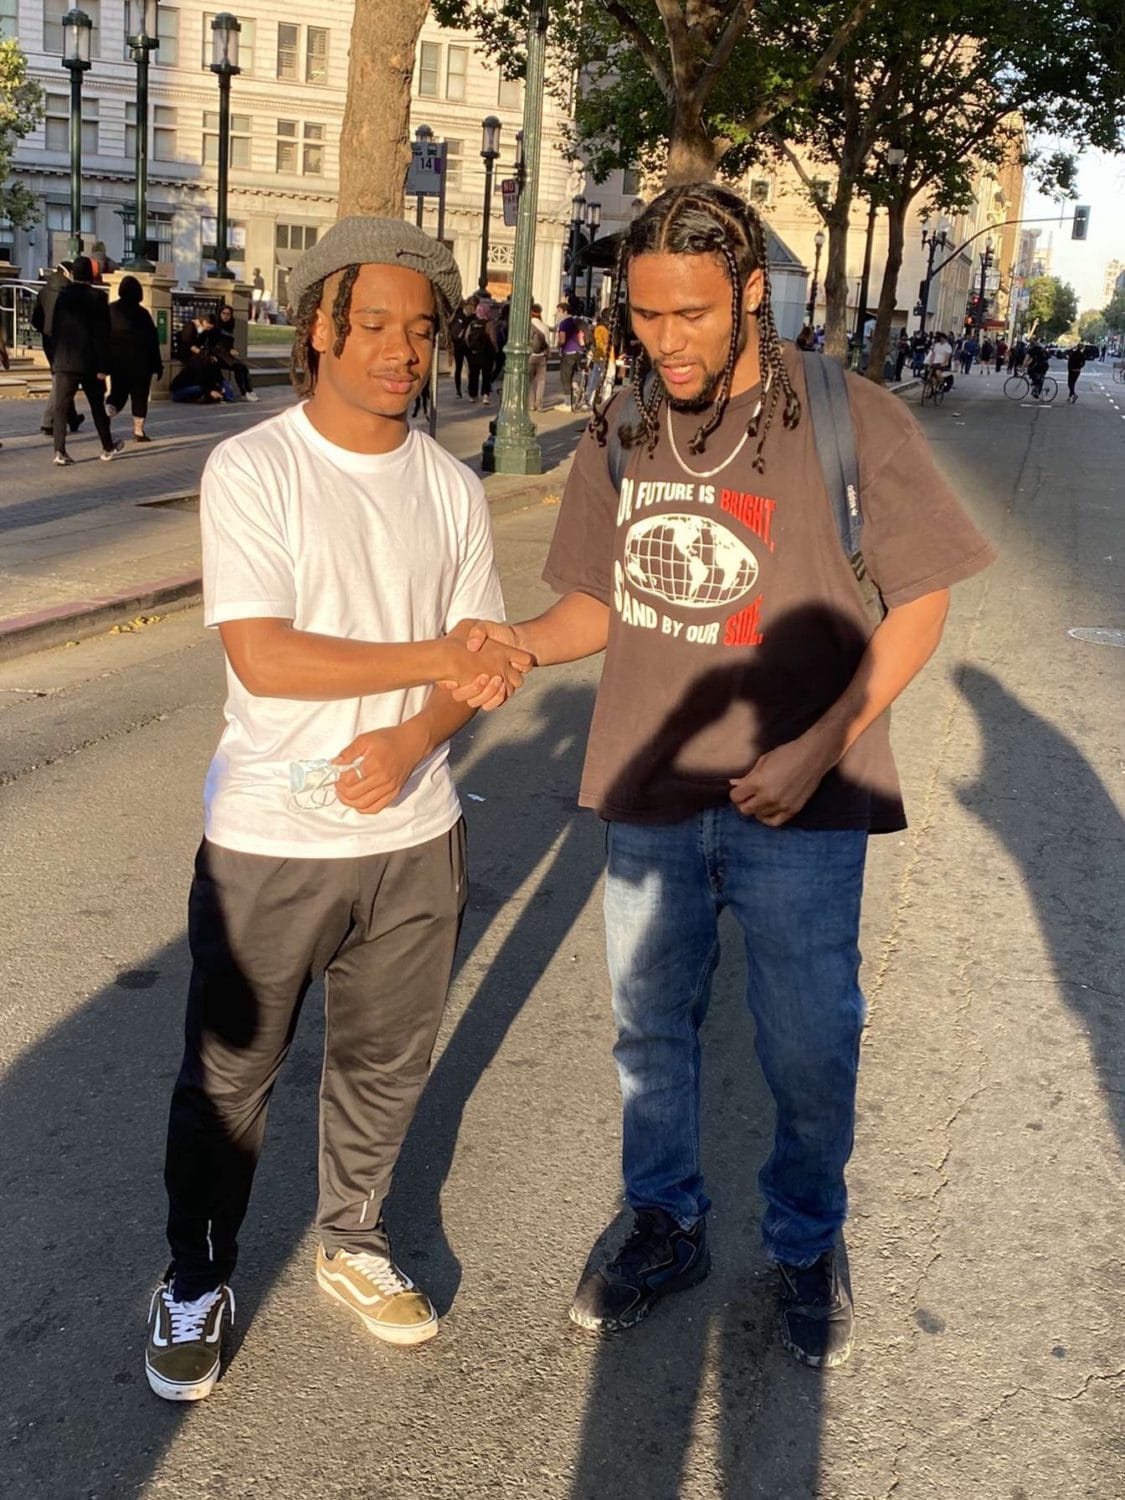 Youth-lead-15000-march-from-Oakland-Tech-to-Oscar-Grant-Plaza-060120-student-leaders-Akil-Riley-Xavier-Brown-congratulate-each-other-at-march-end, Oakland youth lead 15,000 marching for George Floyd, Local News & Views 